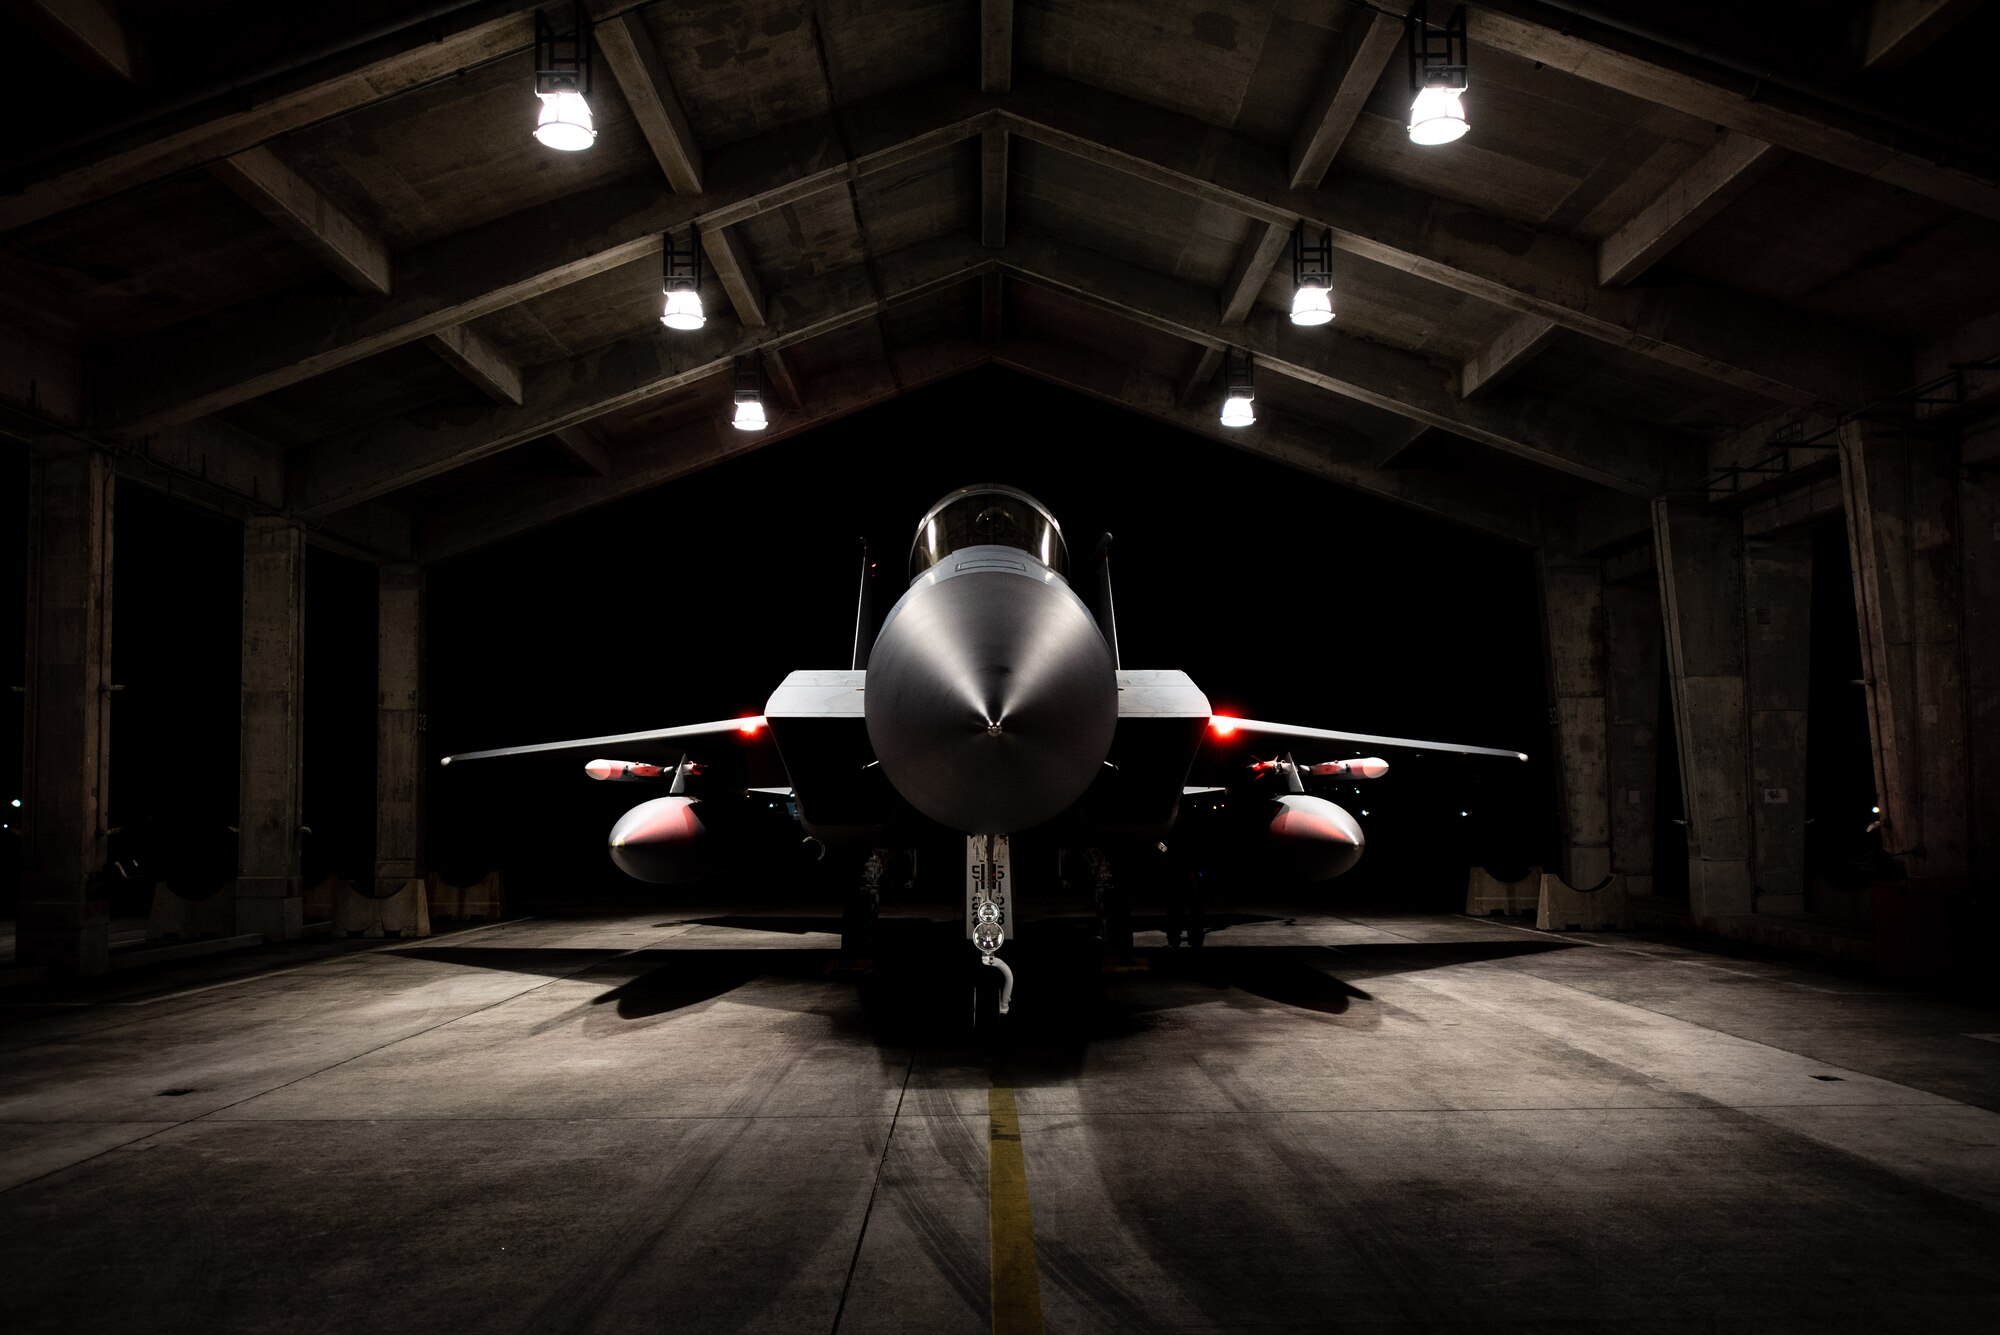 An F-15C Eagle assigned to the 67th Fighter Squadron is postured in a hangar before departing for Red Flag-Alaska at Kadena Air Base, Japan, April 15, 2022. This exercise reinforces the United States’ continued commitment to the region as a Pacific nation, leader and power. (U.S. Air Force photo by Airman 1st Class Sebastian Romawac)